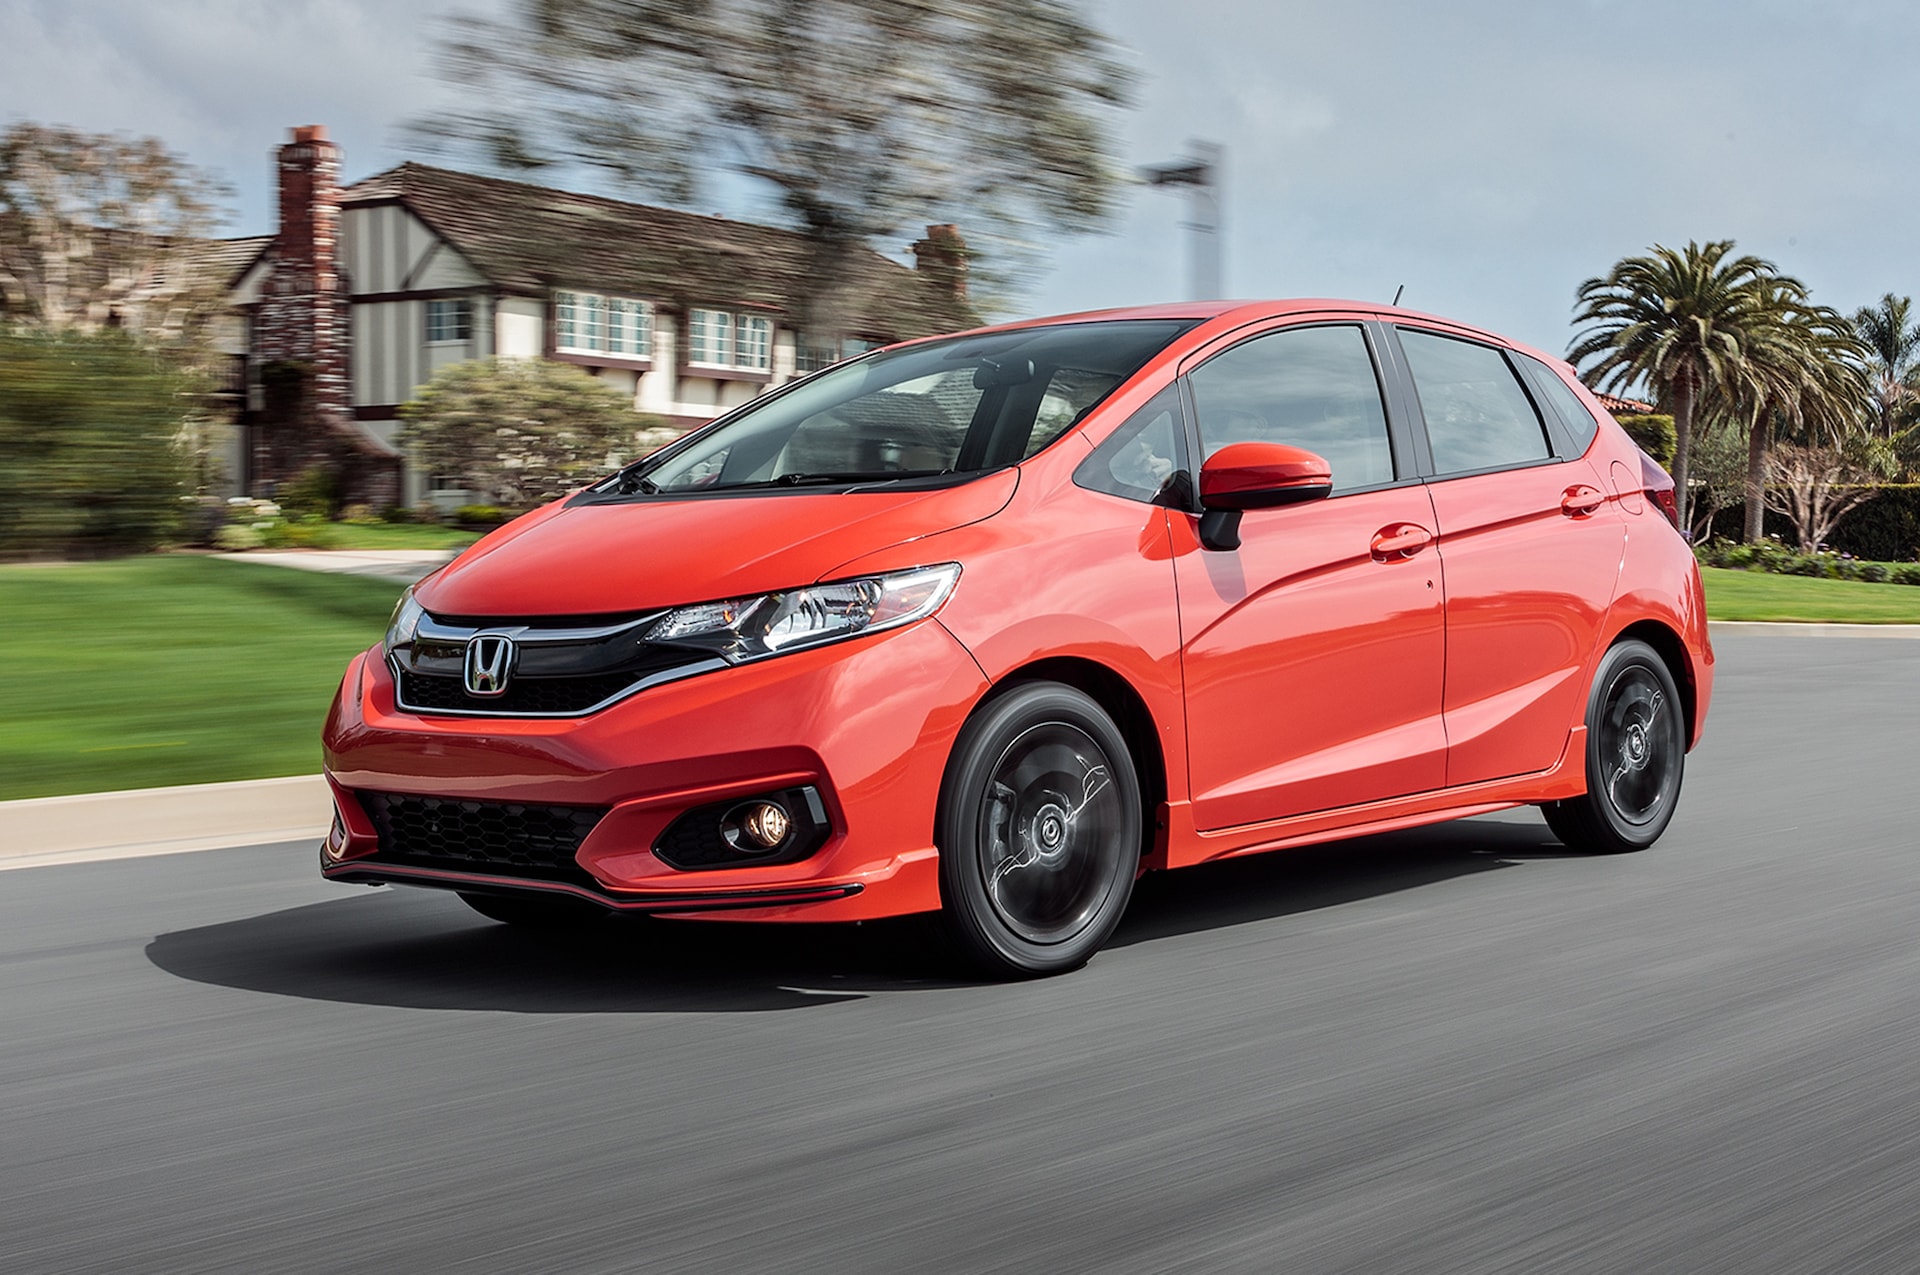 2018 Honda Fit Sport First Test Review: Where Practicality and Fun Meet